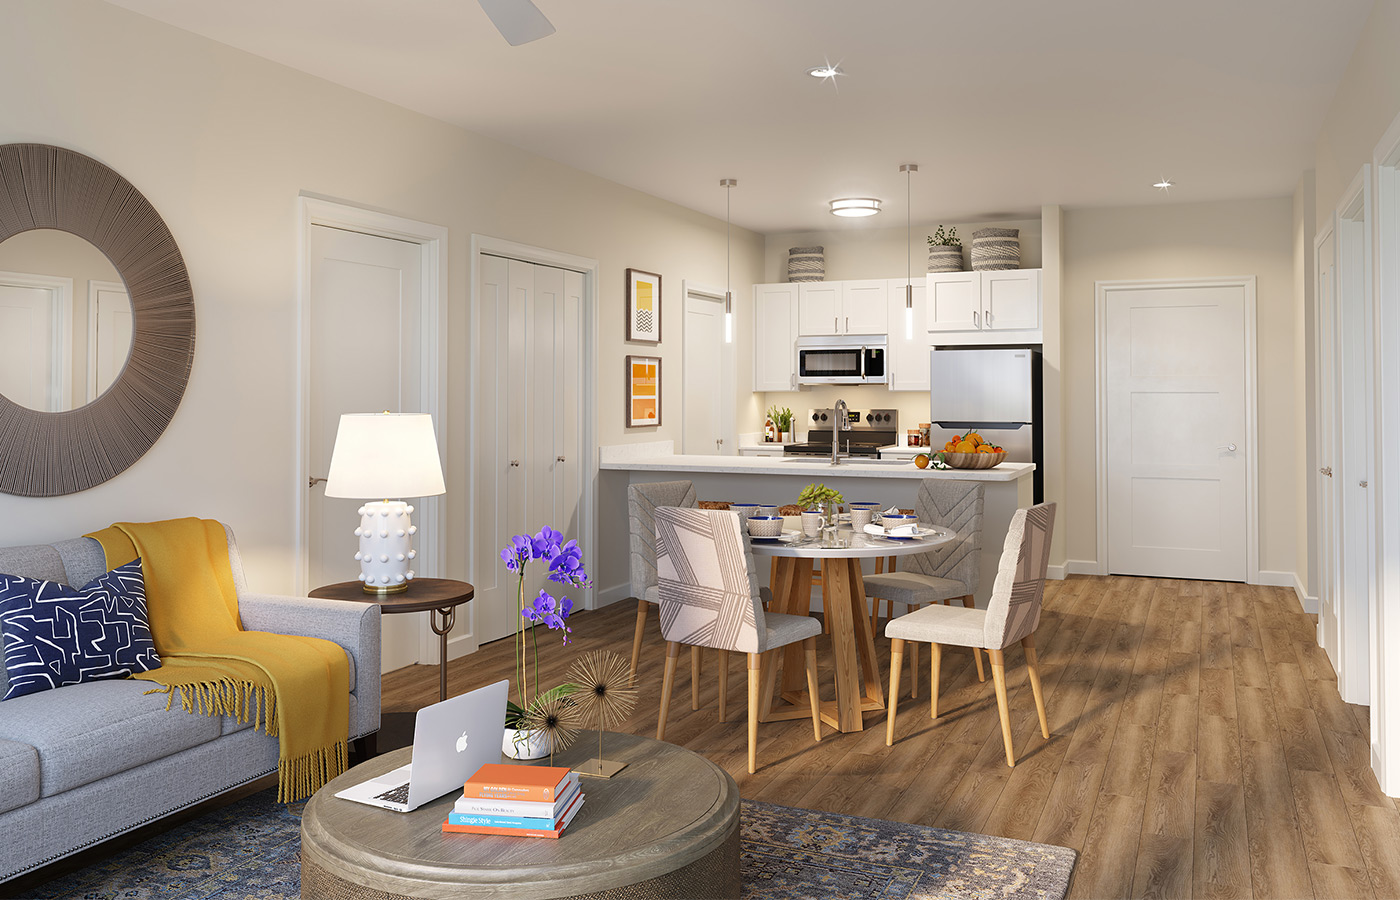 Fully furnished model apartment featuring a furnished kitchen, dining area and living room.